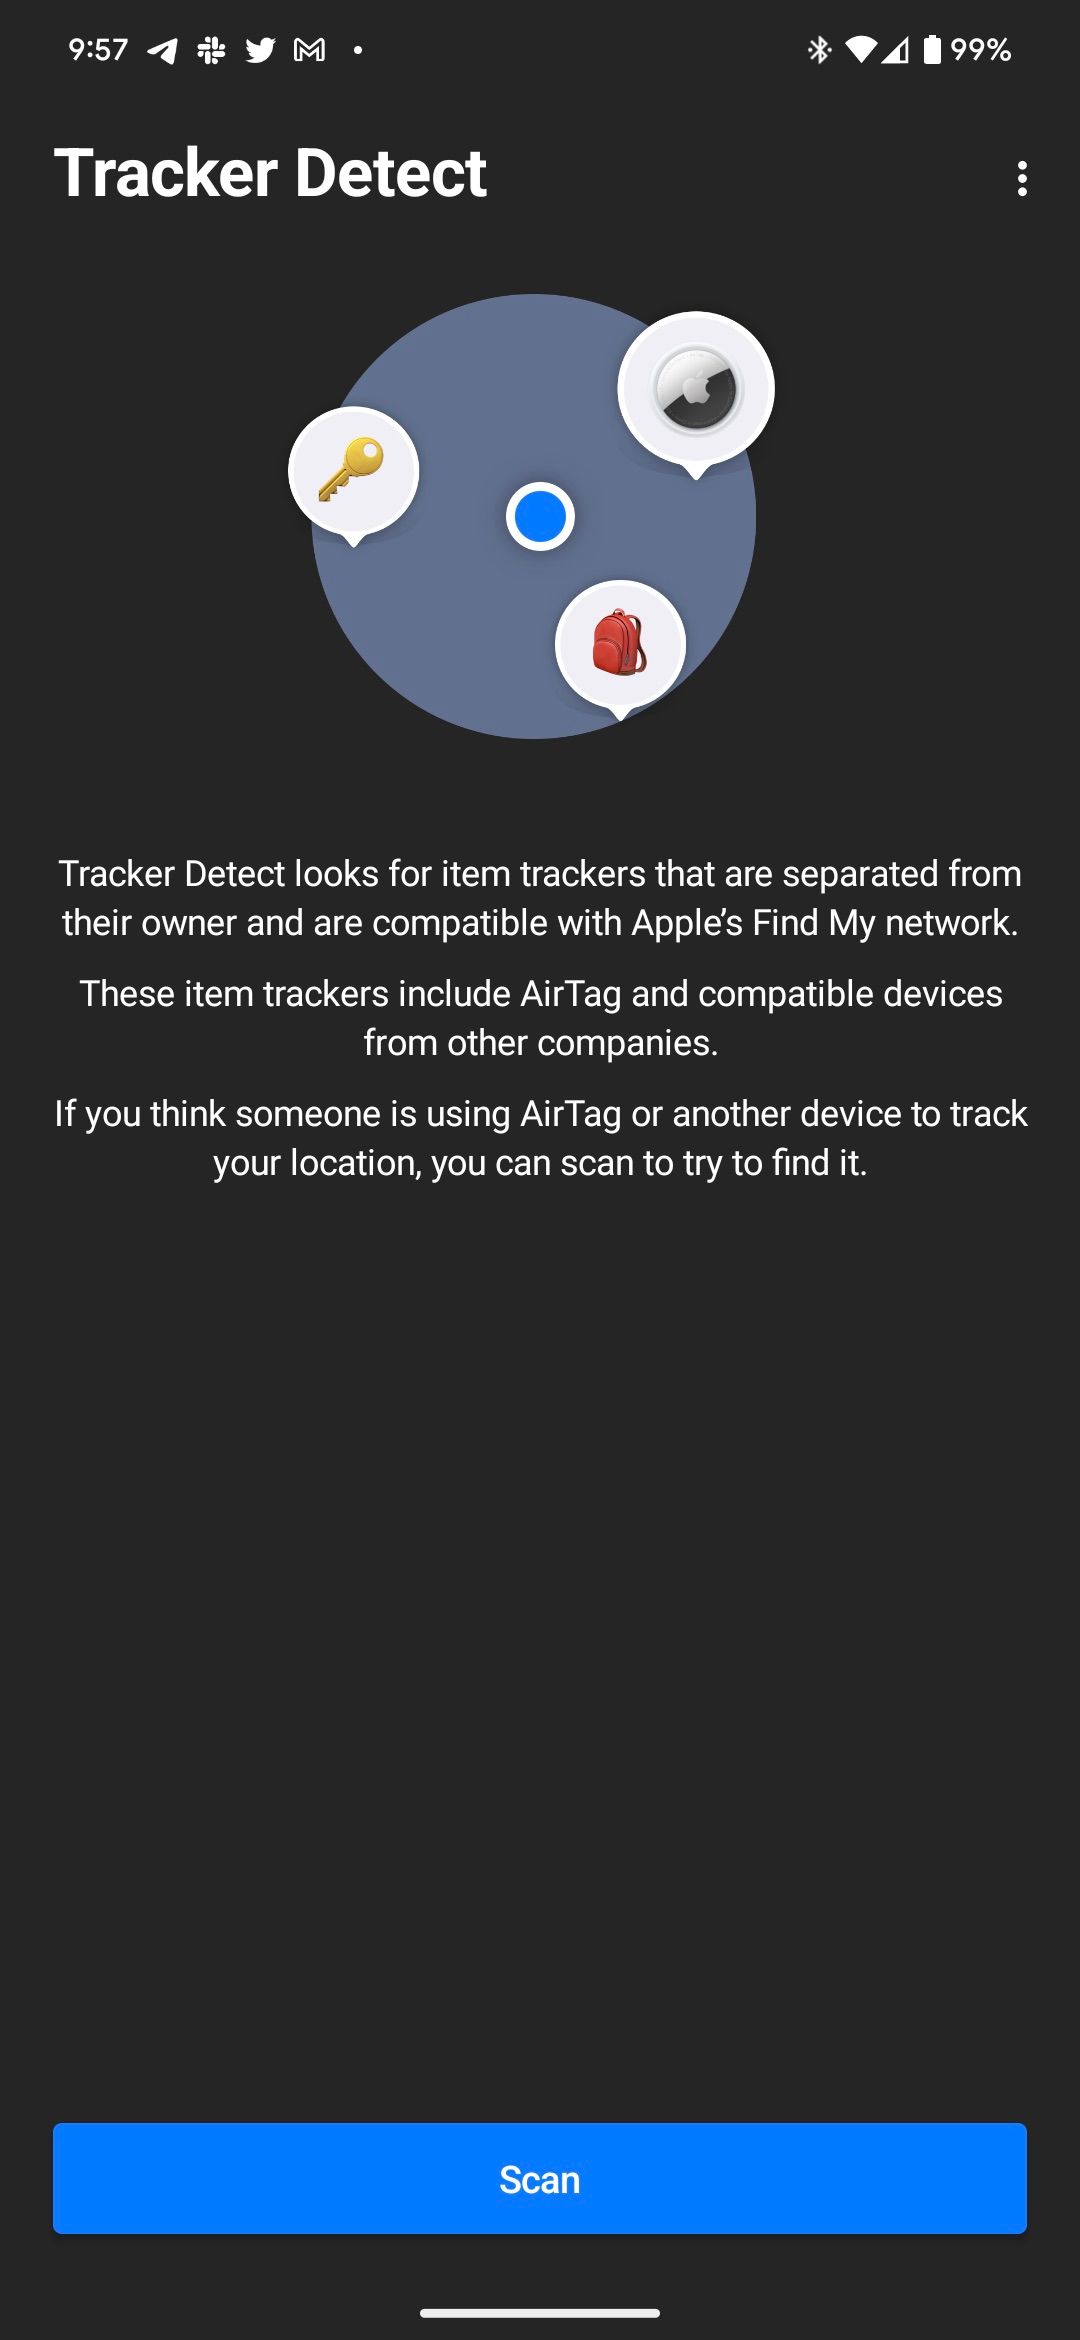 Tracker Detect app for Android showing the Scan option